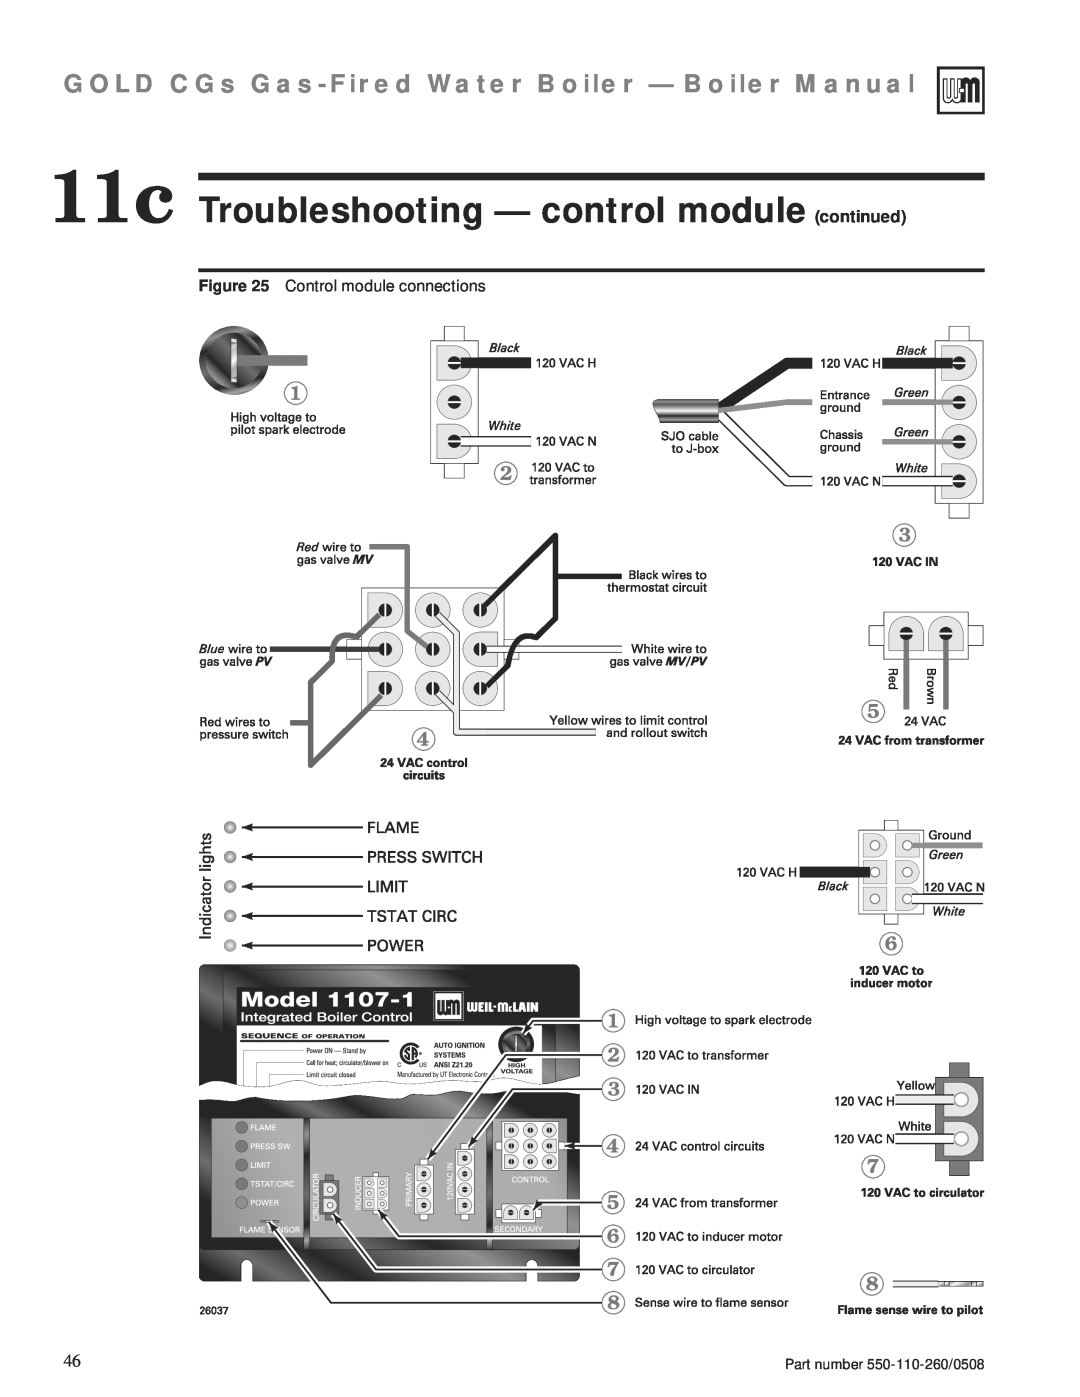 Weil-McLain 550-110-260/0508 manual 11c Troubleshooting - control module continued, Control module connections 